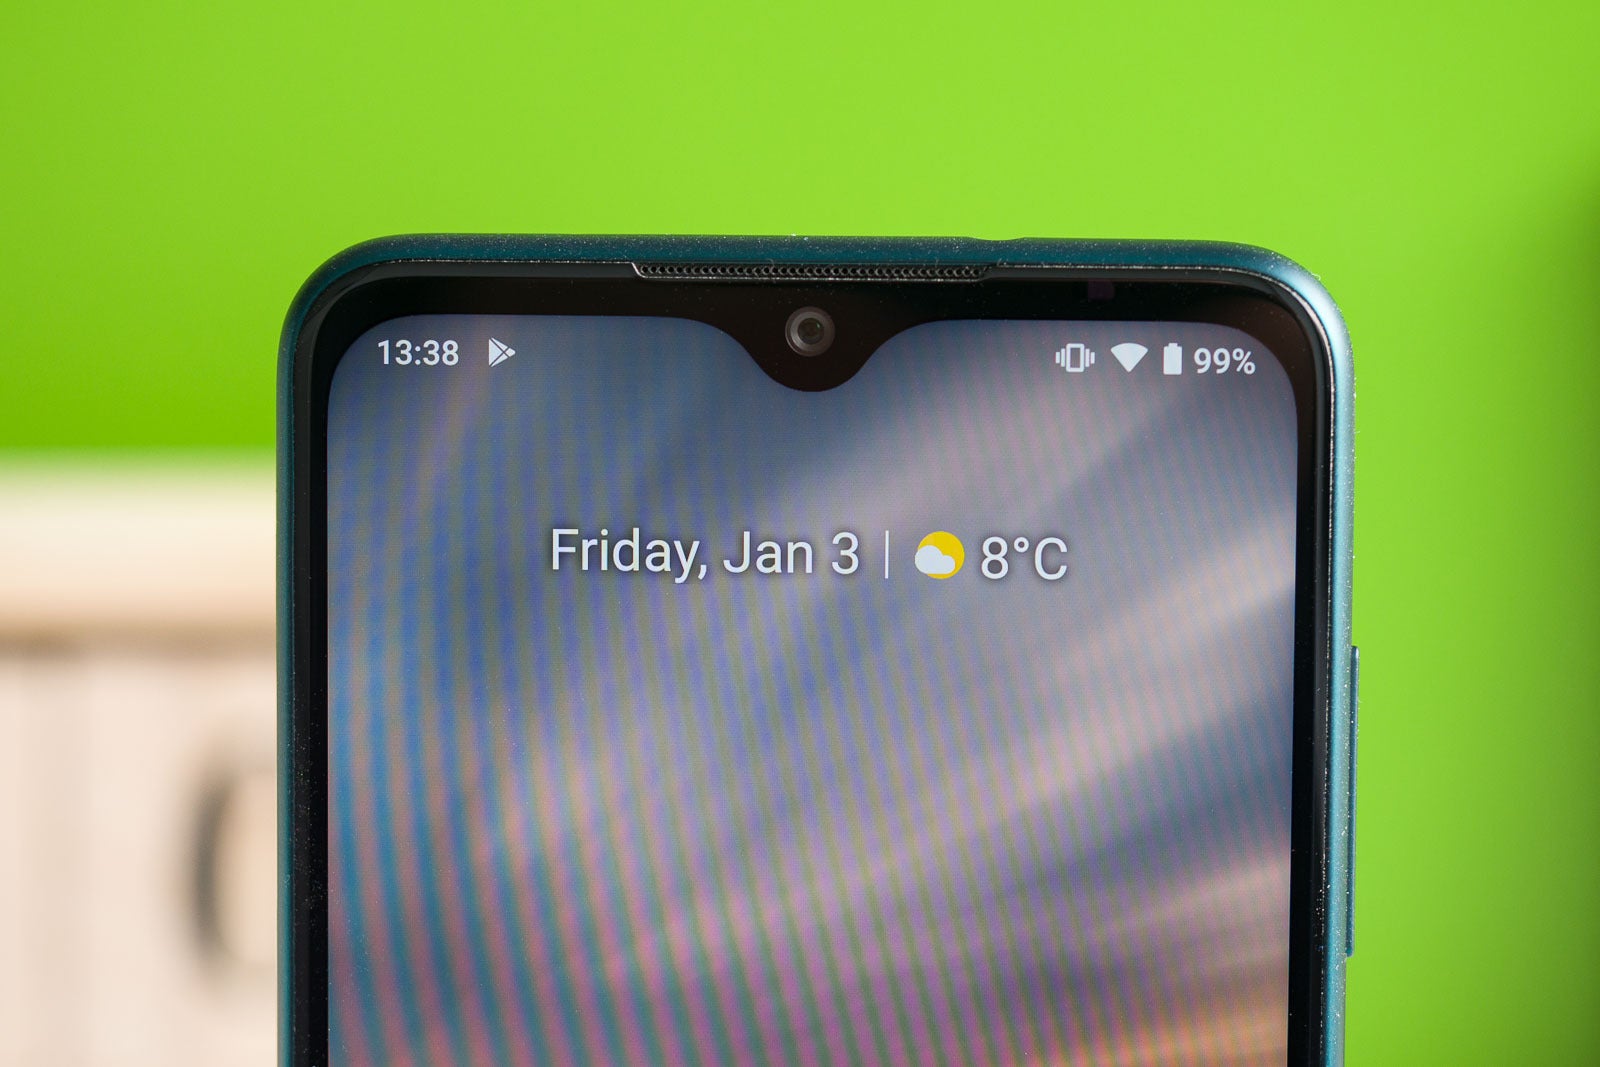 Nokia 5.2 and Nokia 1.3 to be joined by several products at MWC 2020